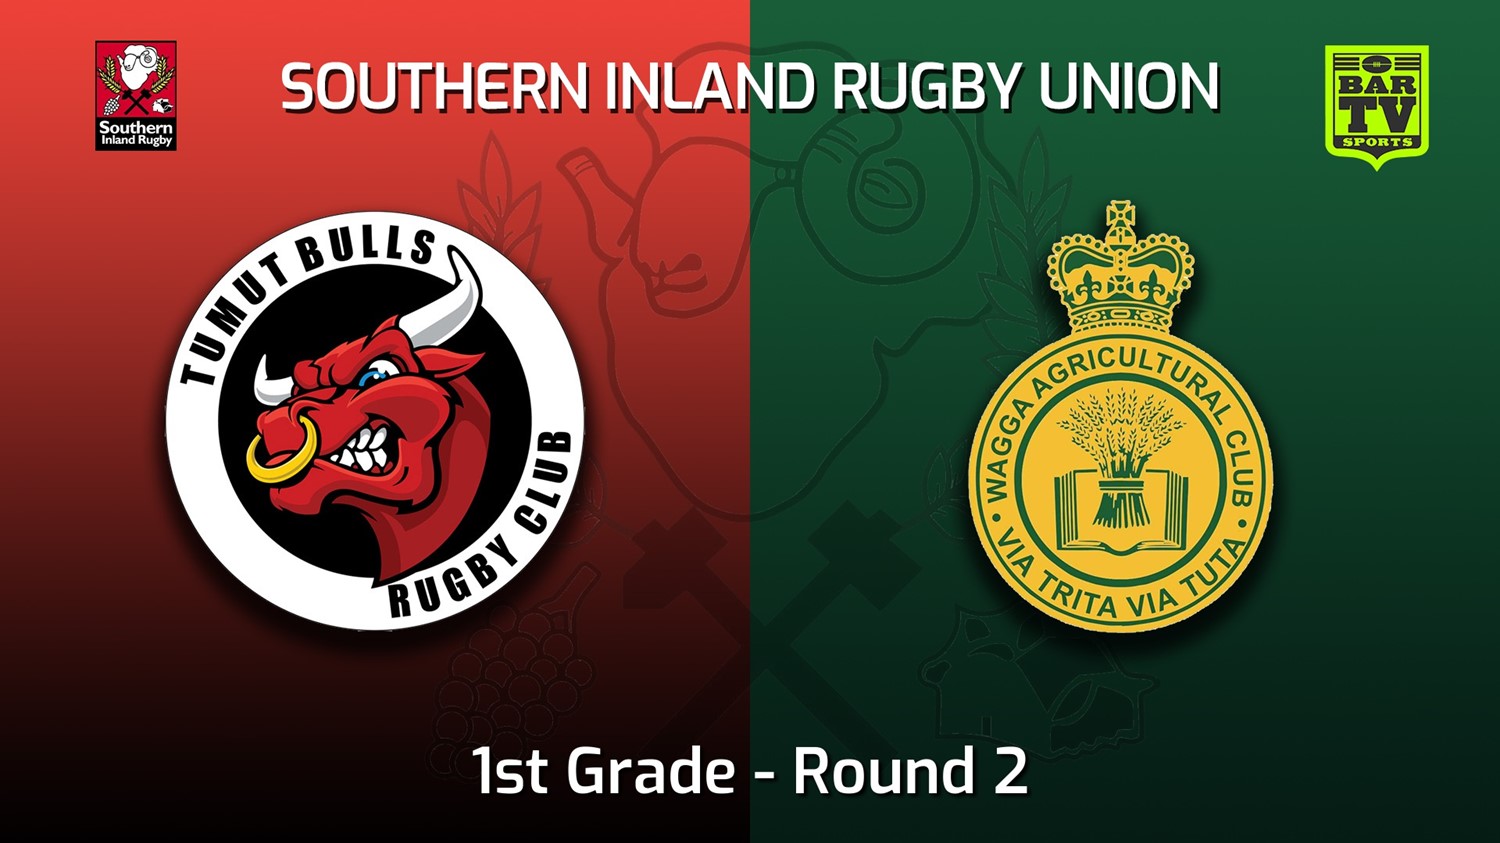 220409-Southern Inland Rugby Union Round 2 - 1st Grade - Tumut Bulls v Wagga Agricultural College Minigame Slate Image